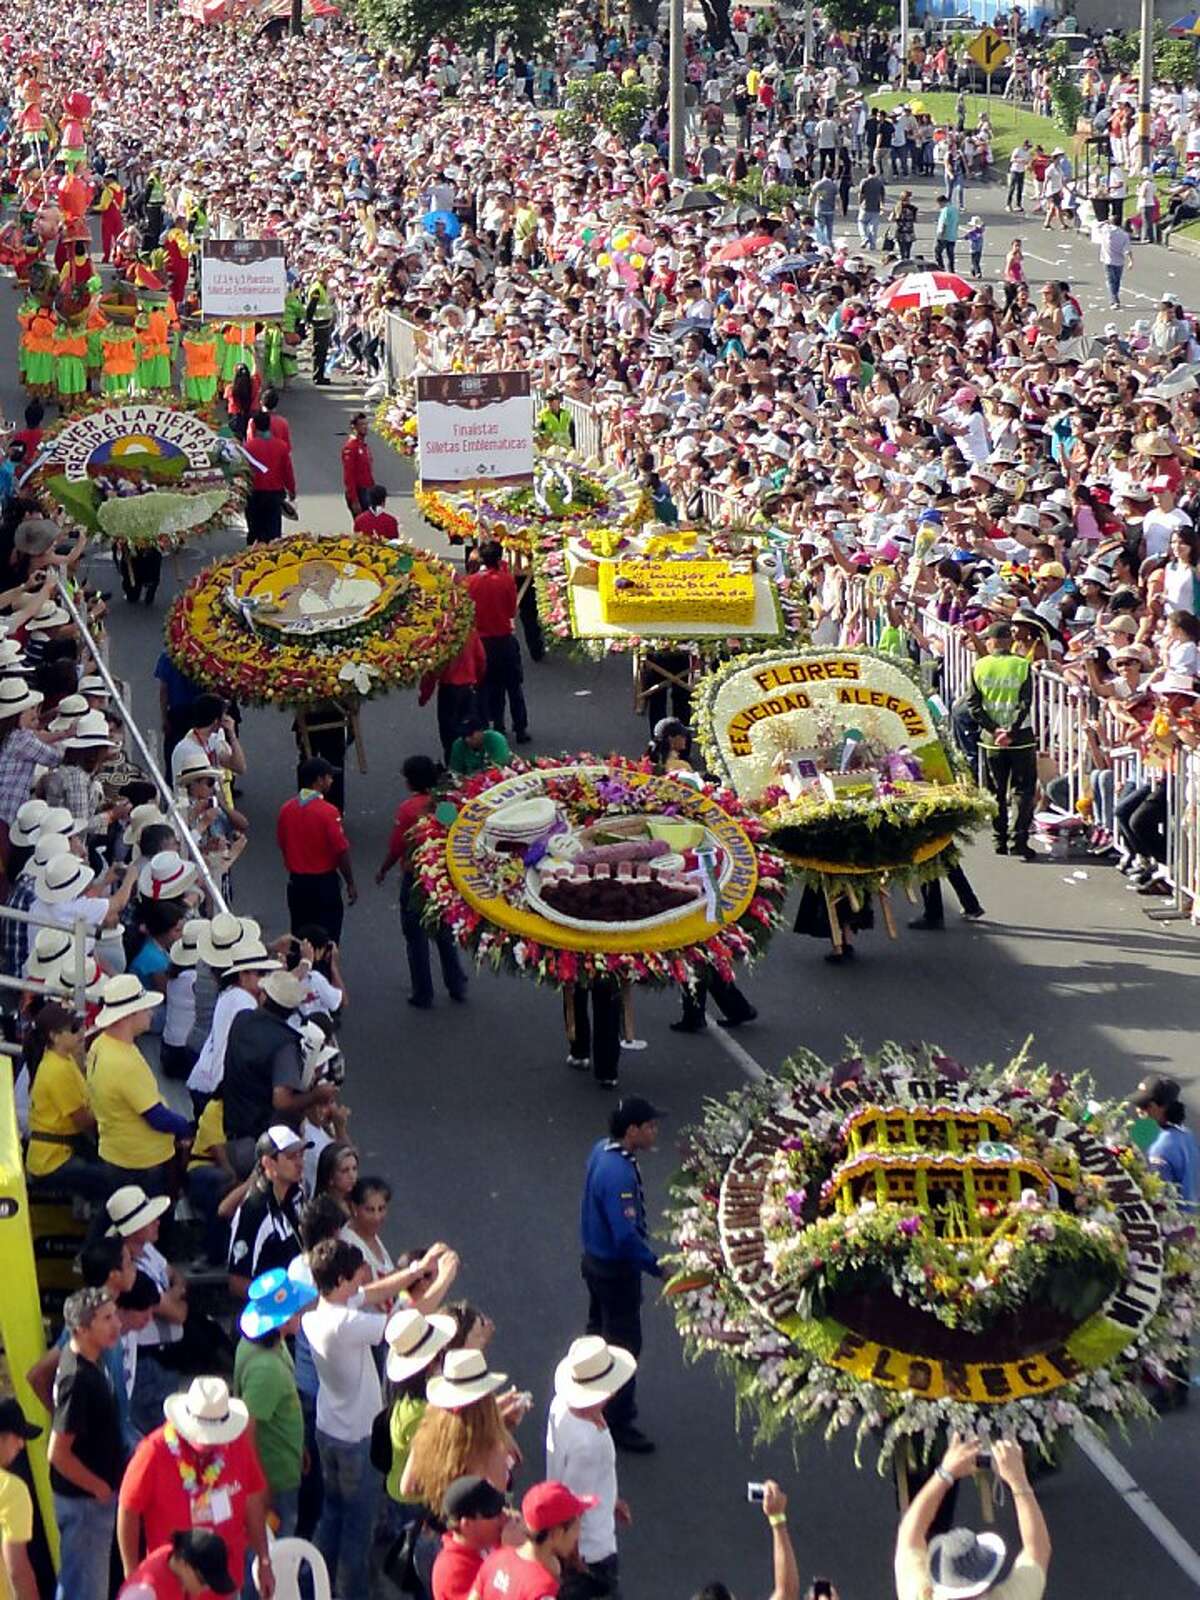 Colombians celebrate the Festival of Flowers